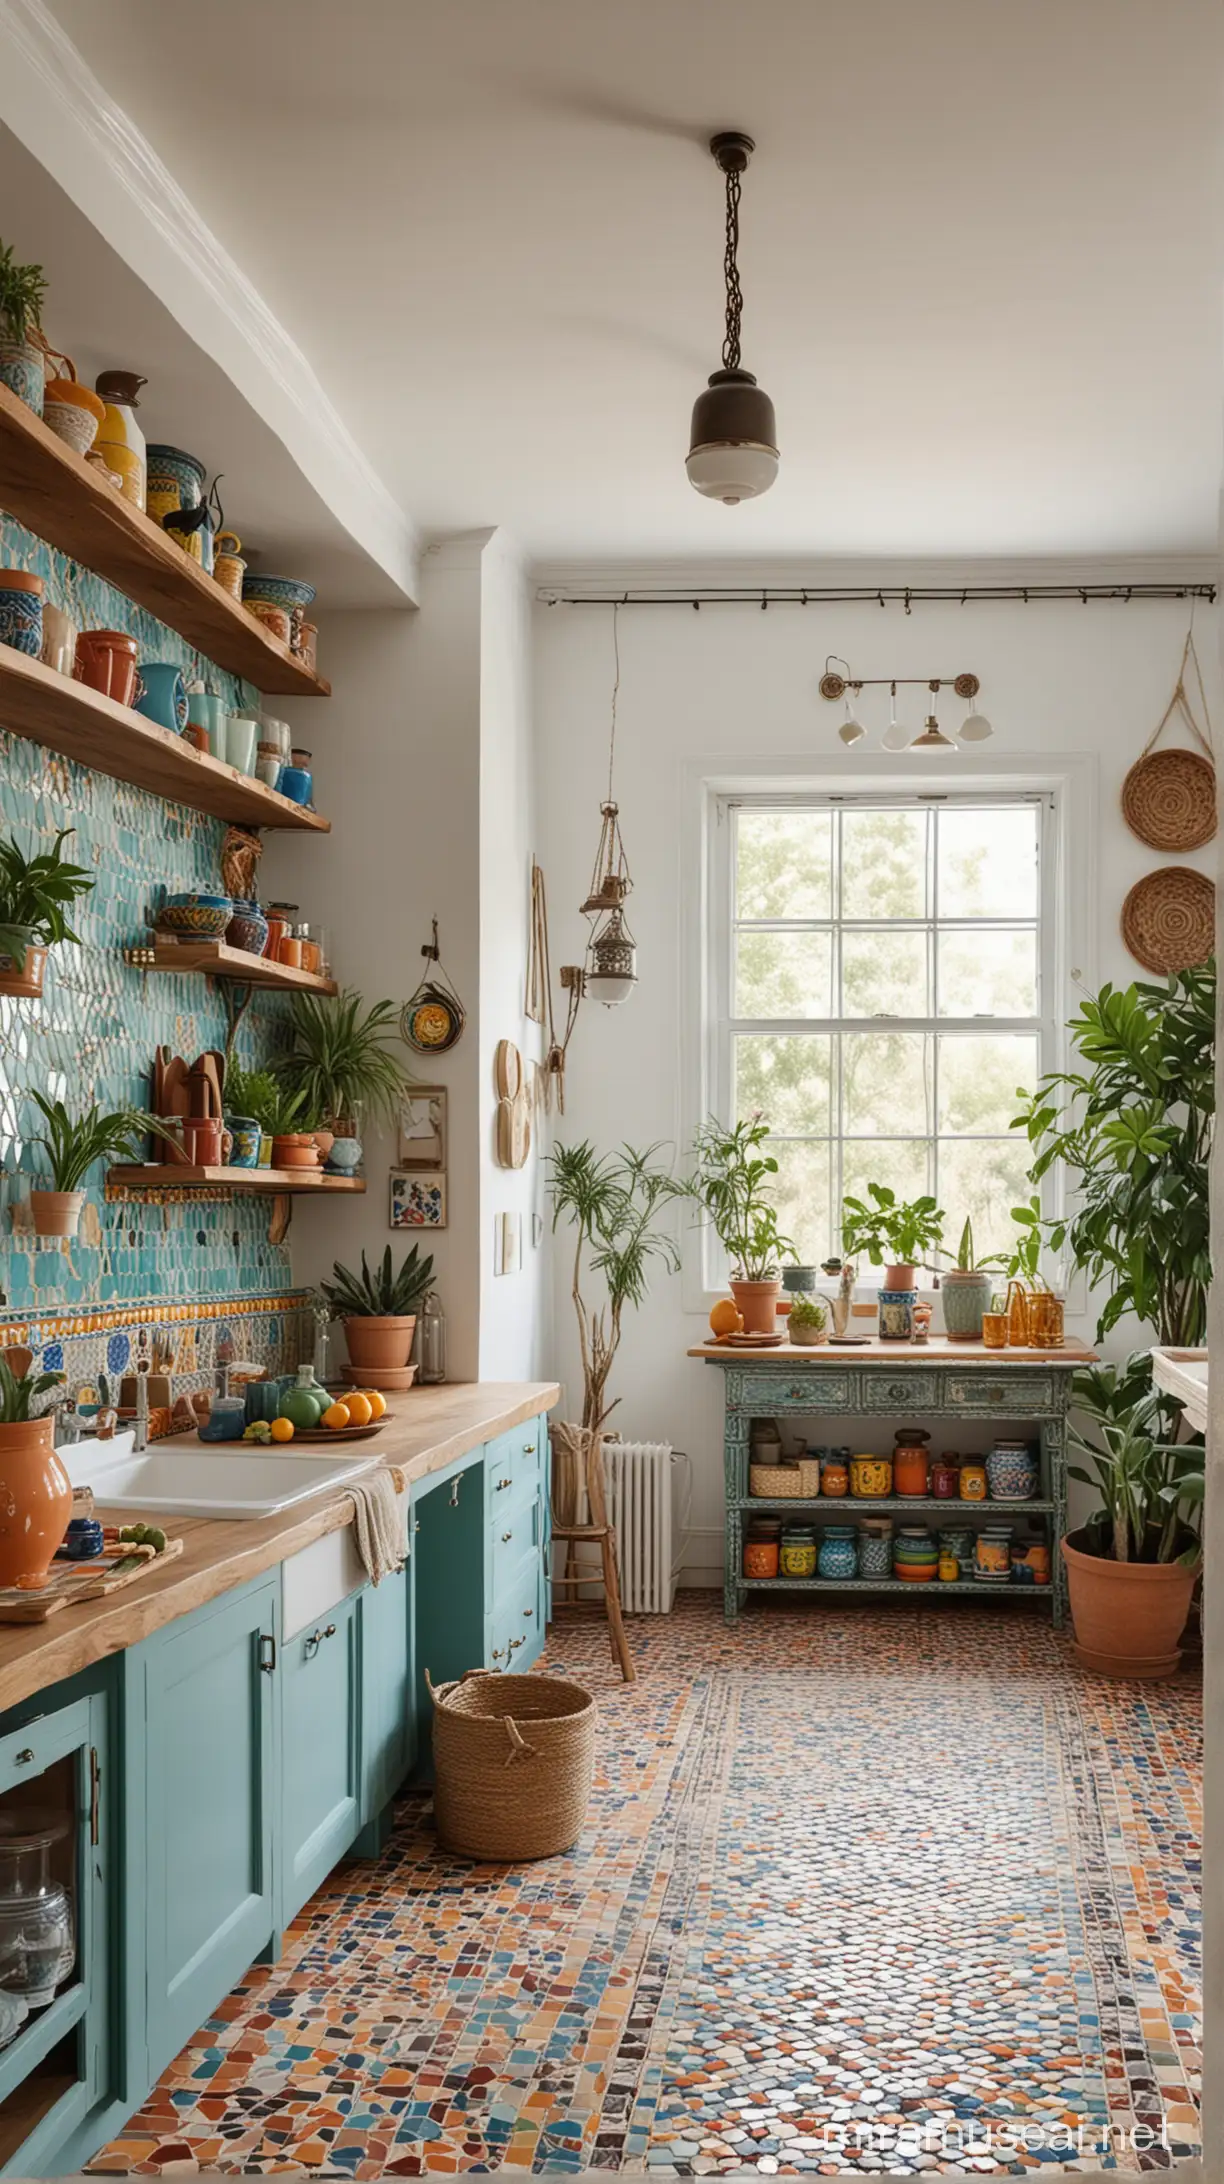 Eclectic Bohemian Kitchen with Moroccan Tiles and Vibrant Decor